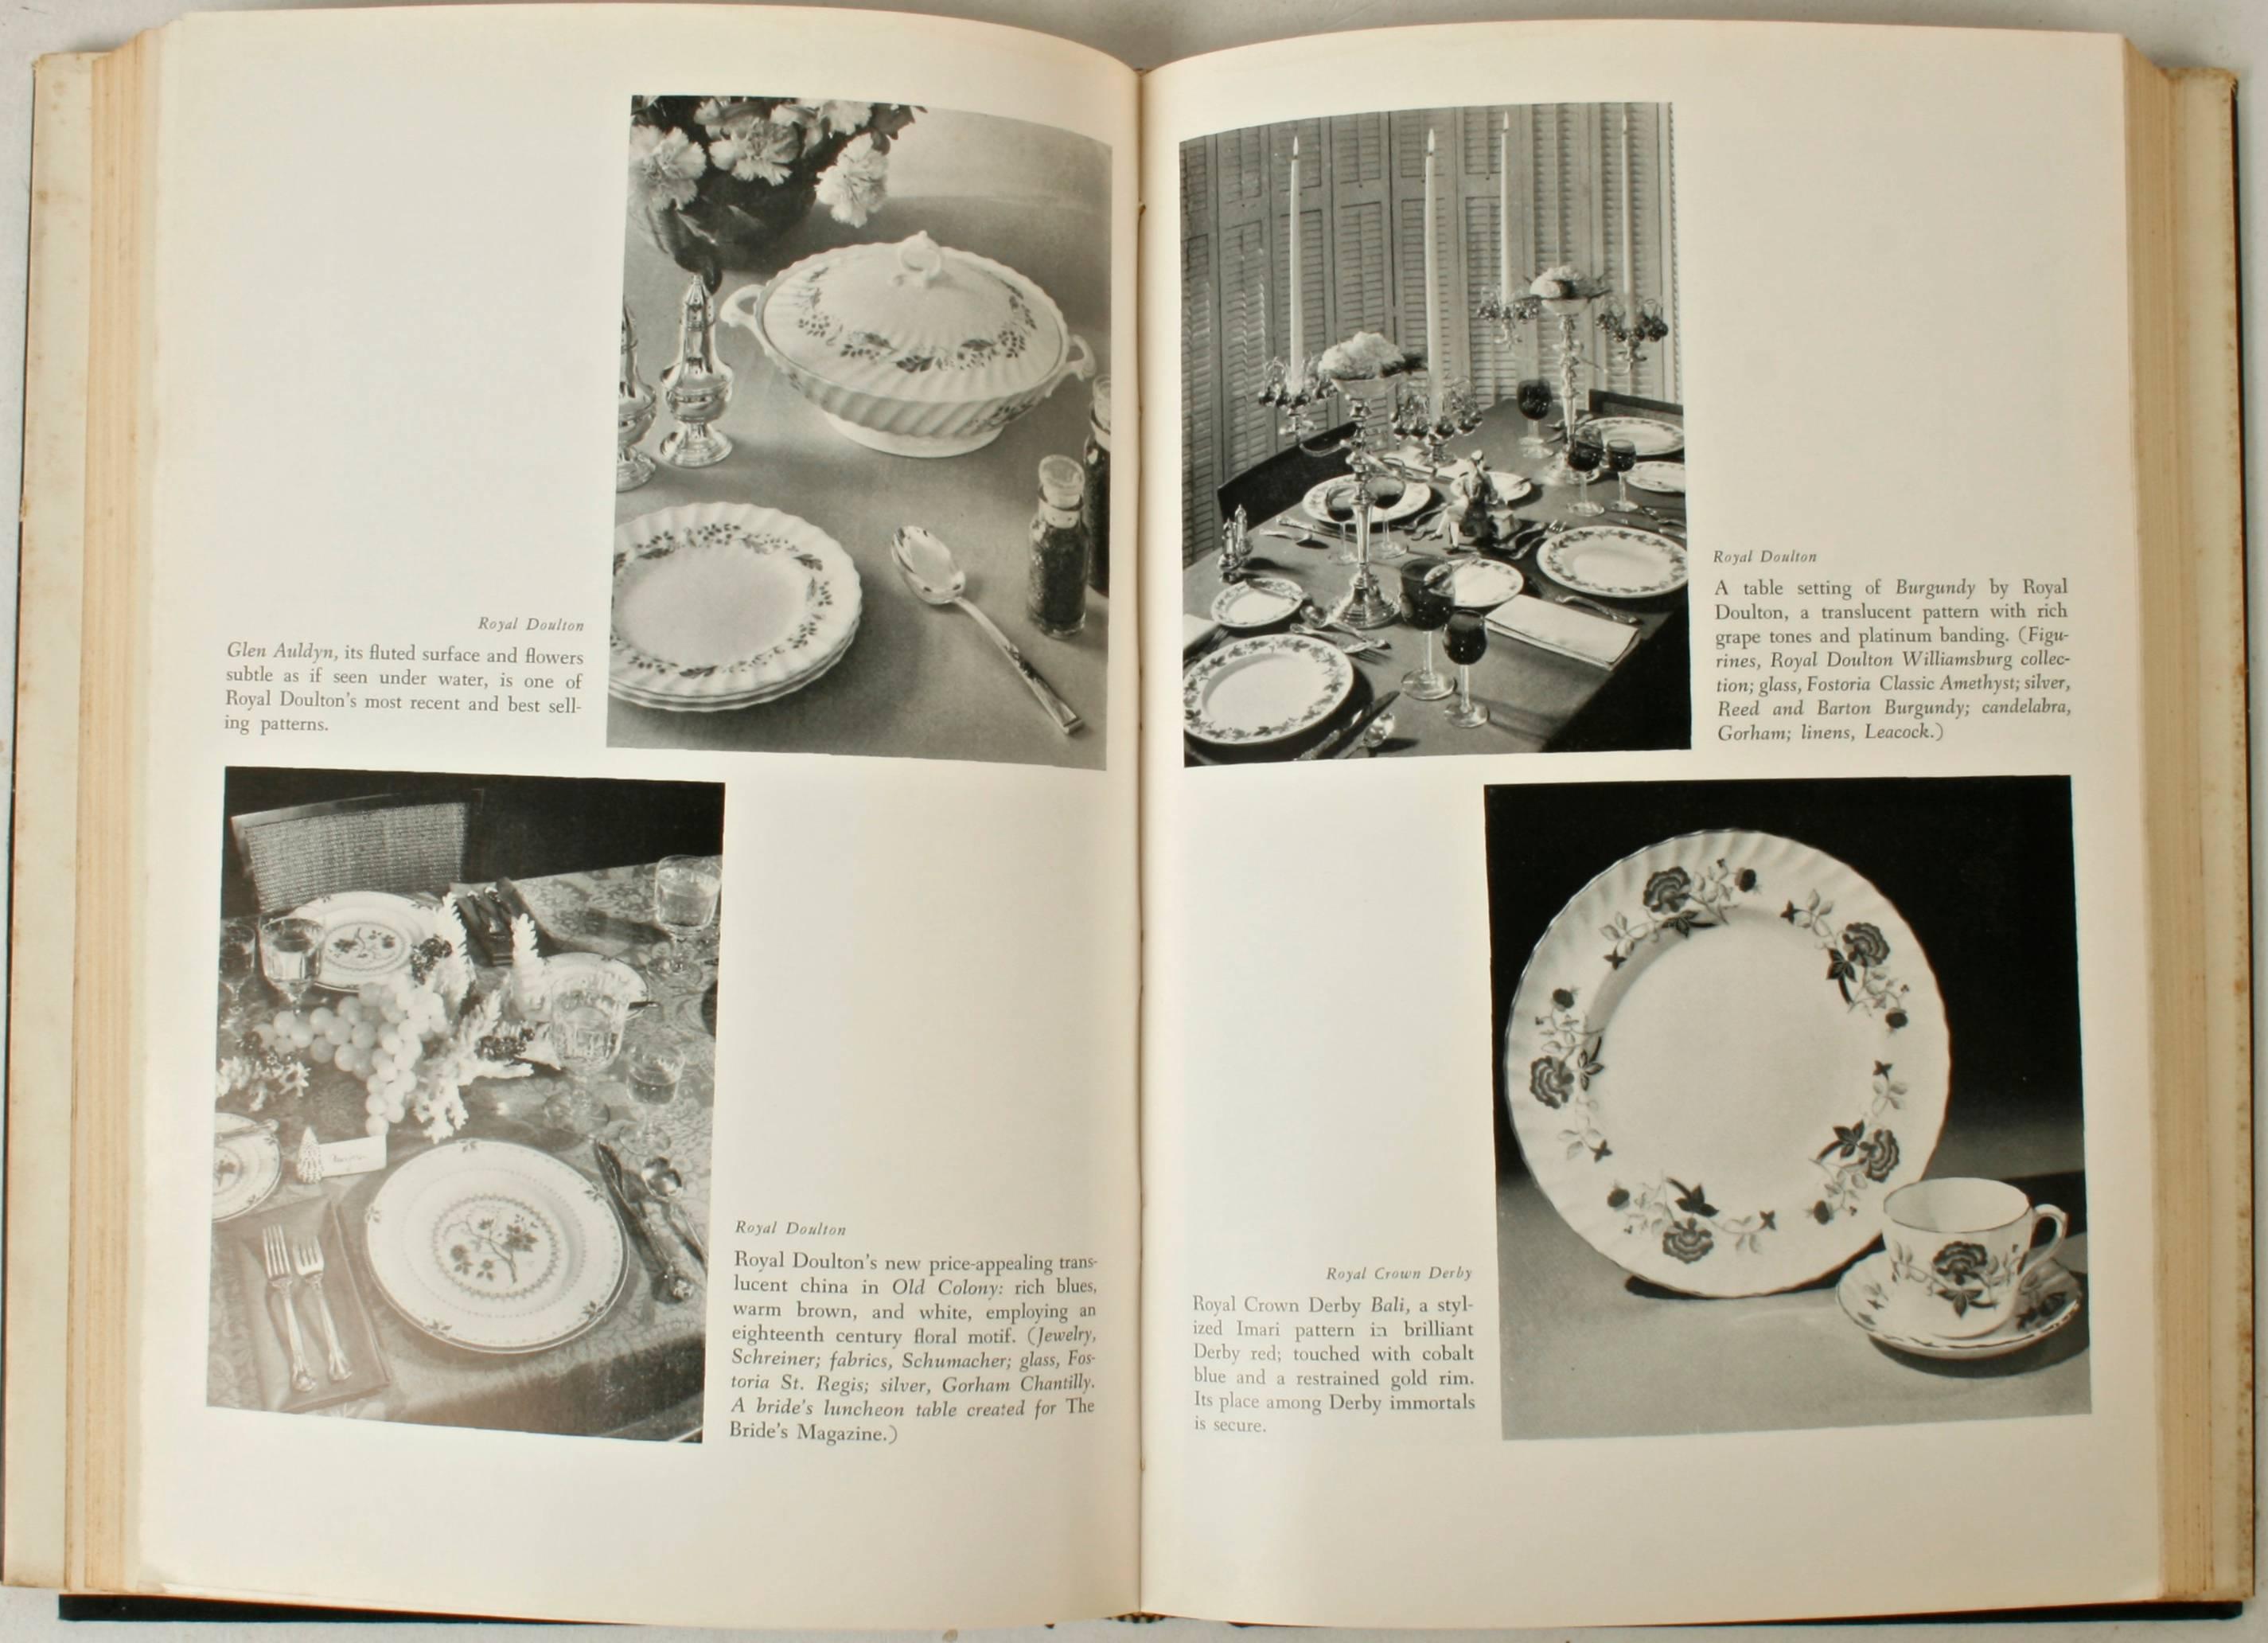 Paper Modern Porcelain by Alberta C. Trimble, First Edition